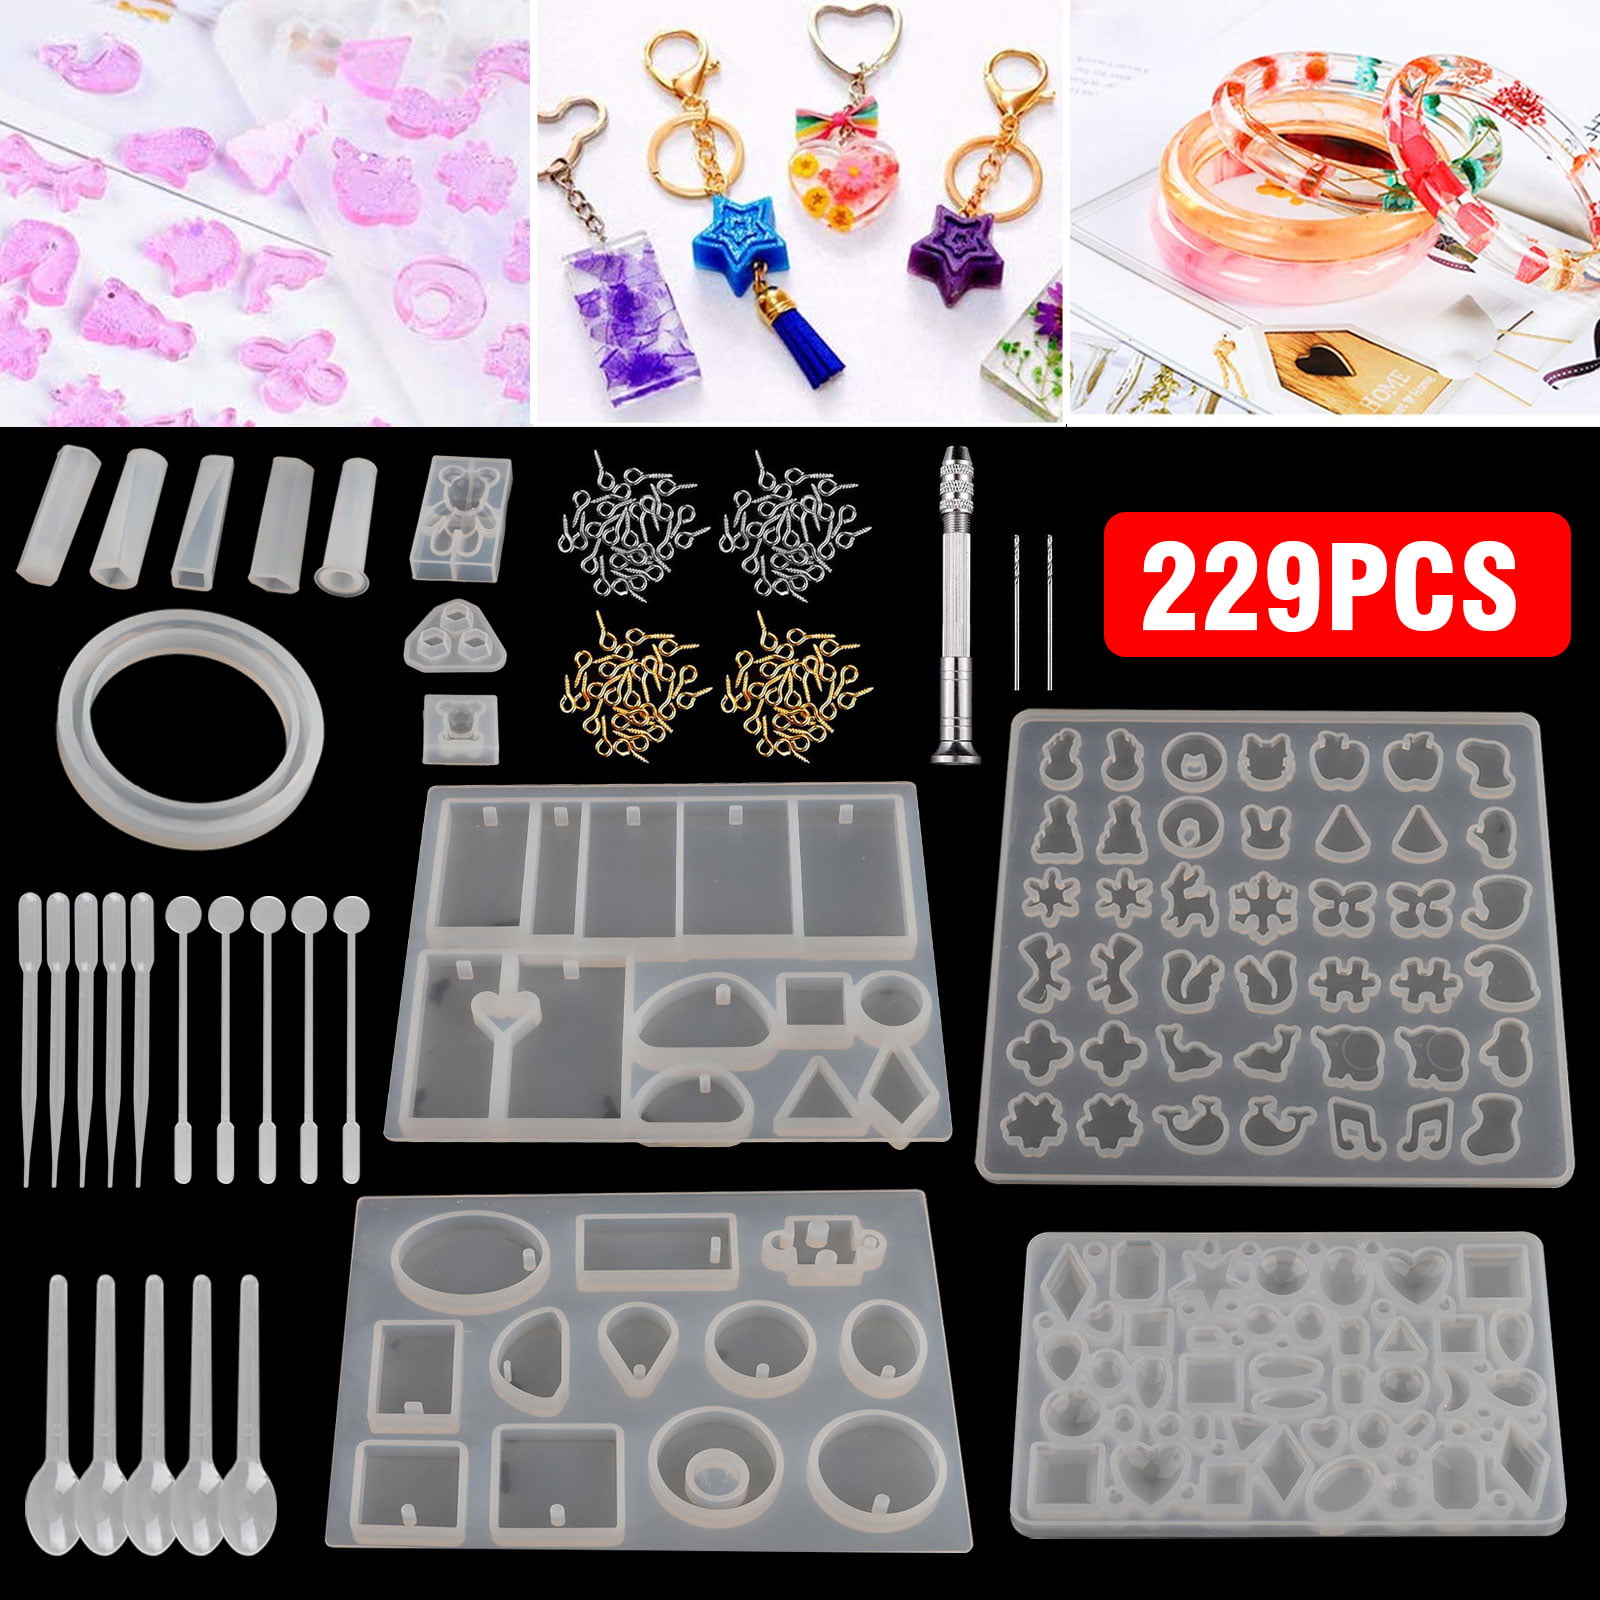 goneryisour Resin Casting Mold Kit DIY Jewelry Craft Moulds Silicone Epoxy Resin Mold Tools Set